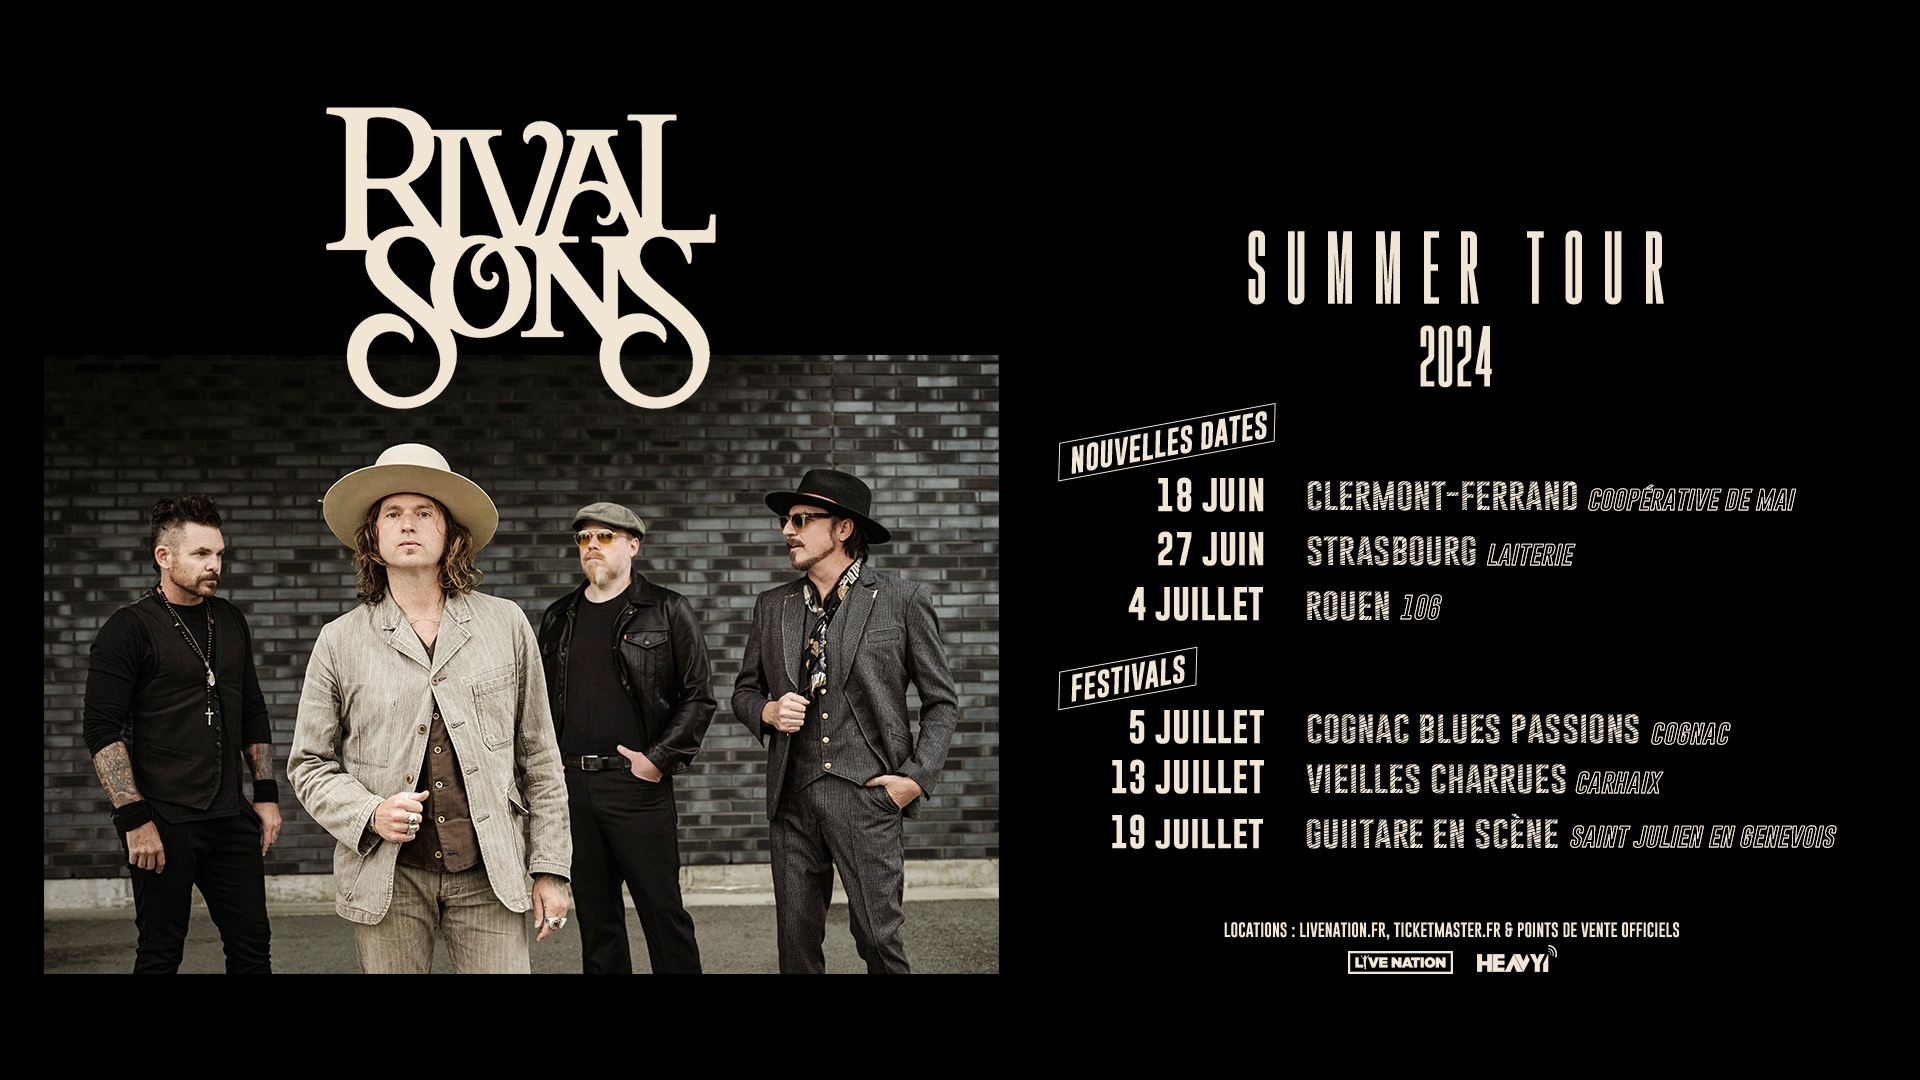 Rival Sons at Den Atelier Tickets